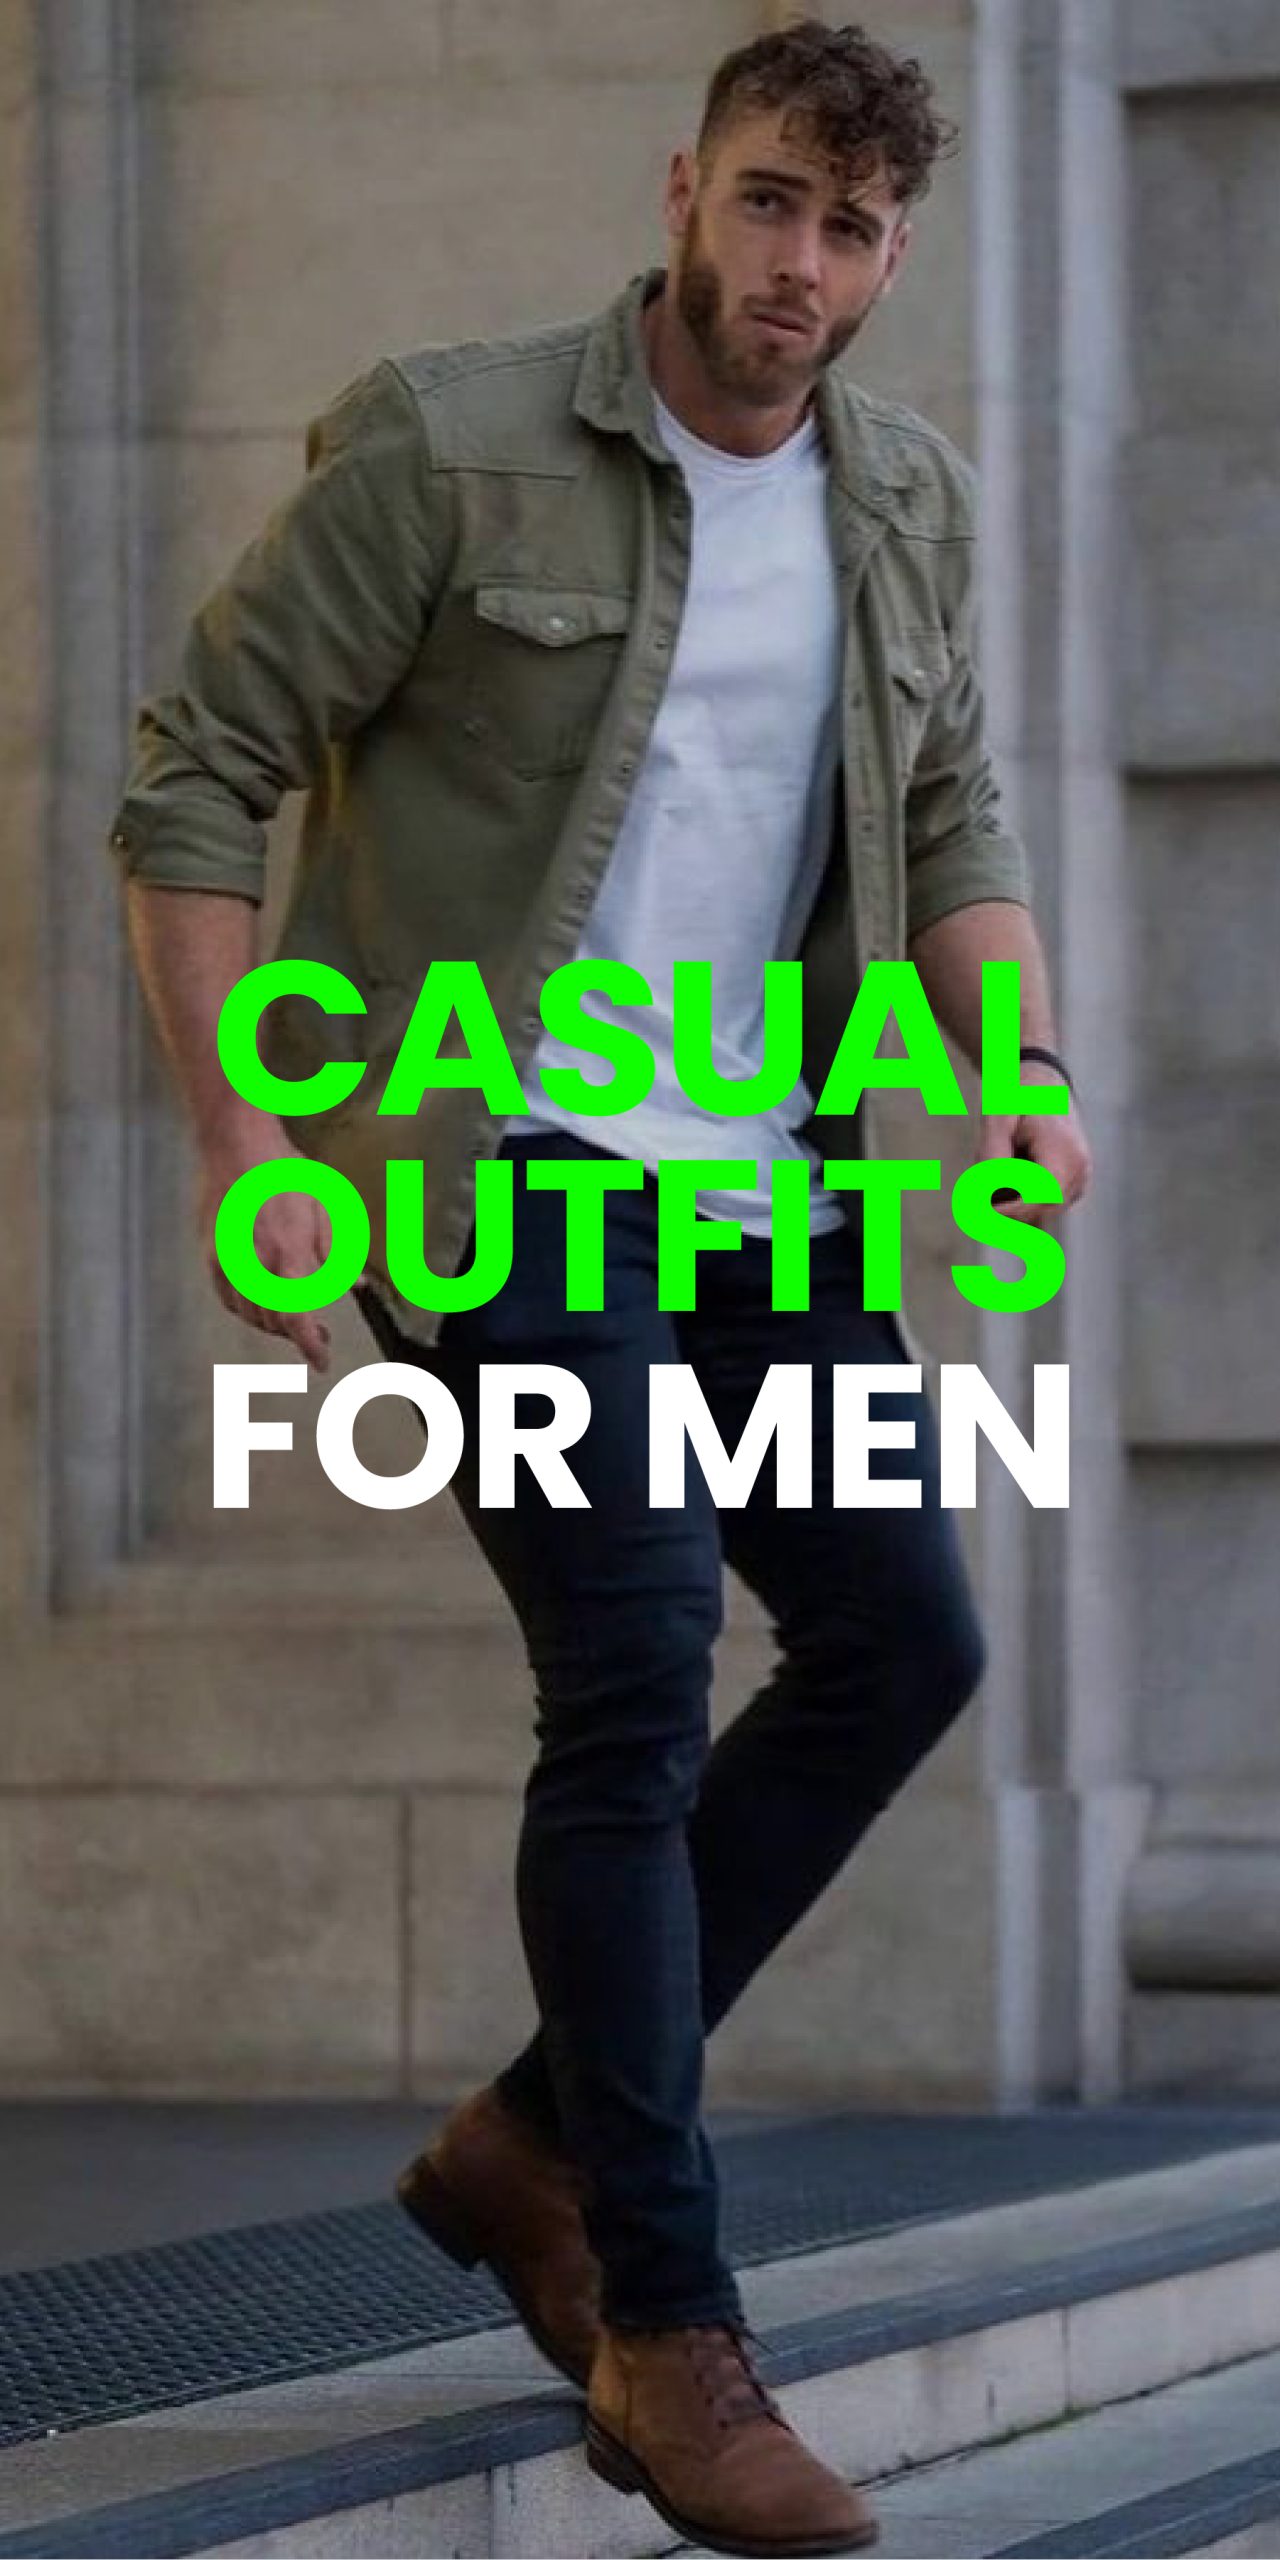 CASUAL OUTFIT FOR MEN